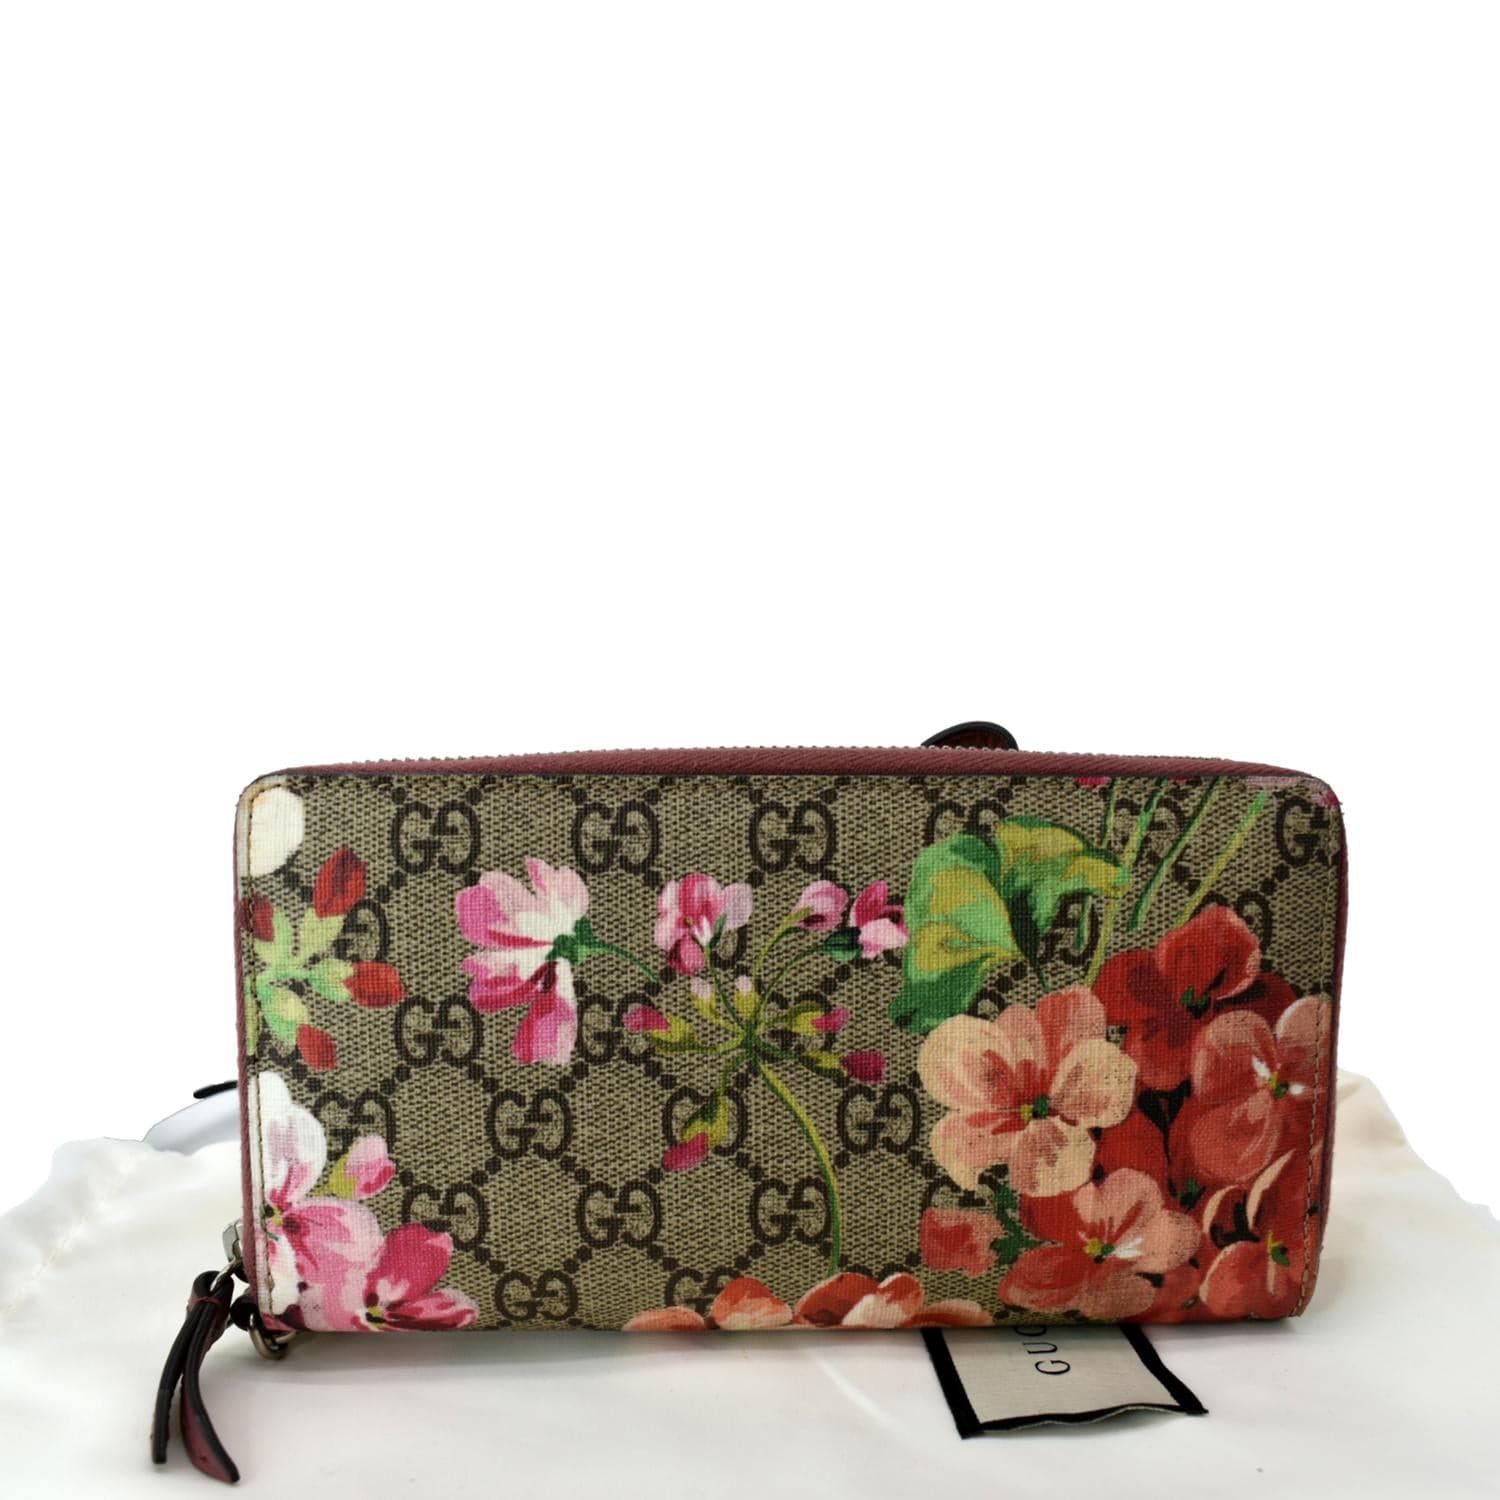 Gucci Beige/Pink GG Coated Canvas Supreme Blooms Key Pouch